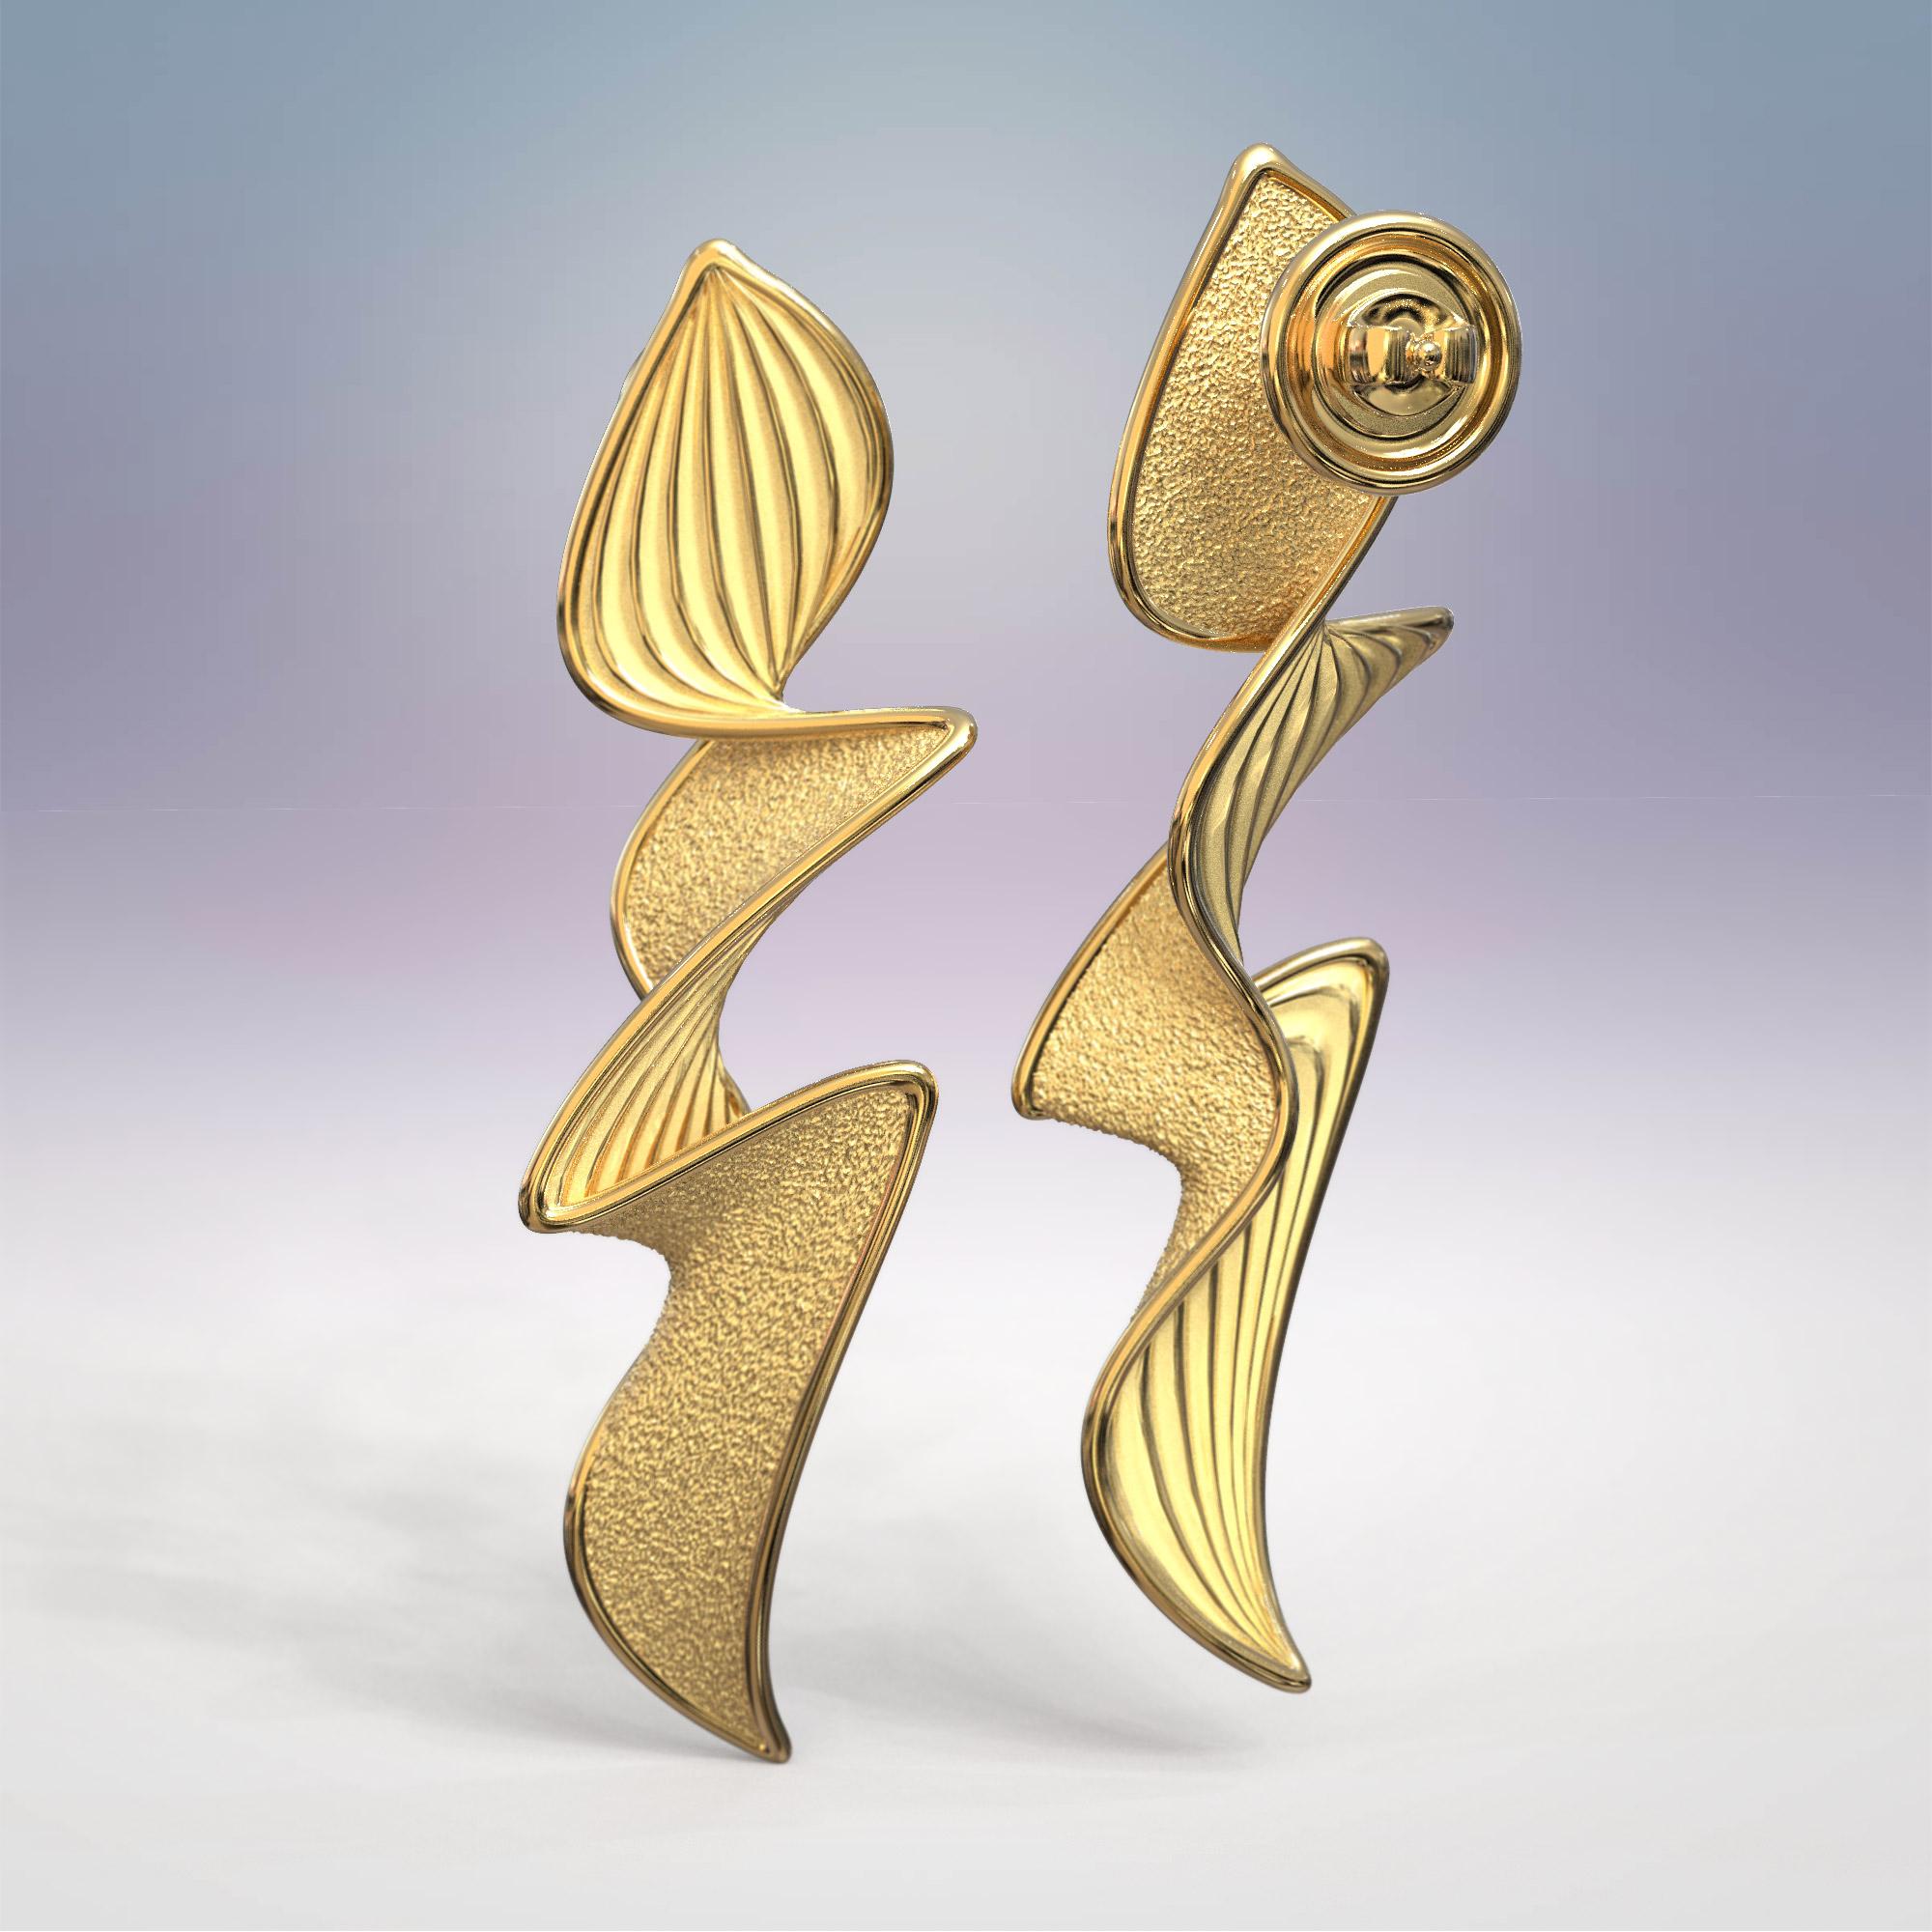 Contemporary Statement Earrings in 18k by Oltremare Gioielli, Italian Fine Jewelry For Sale